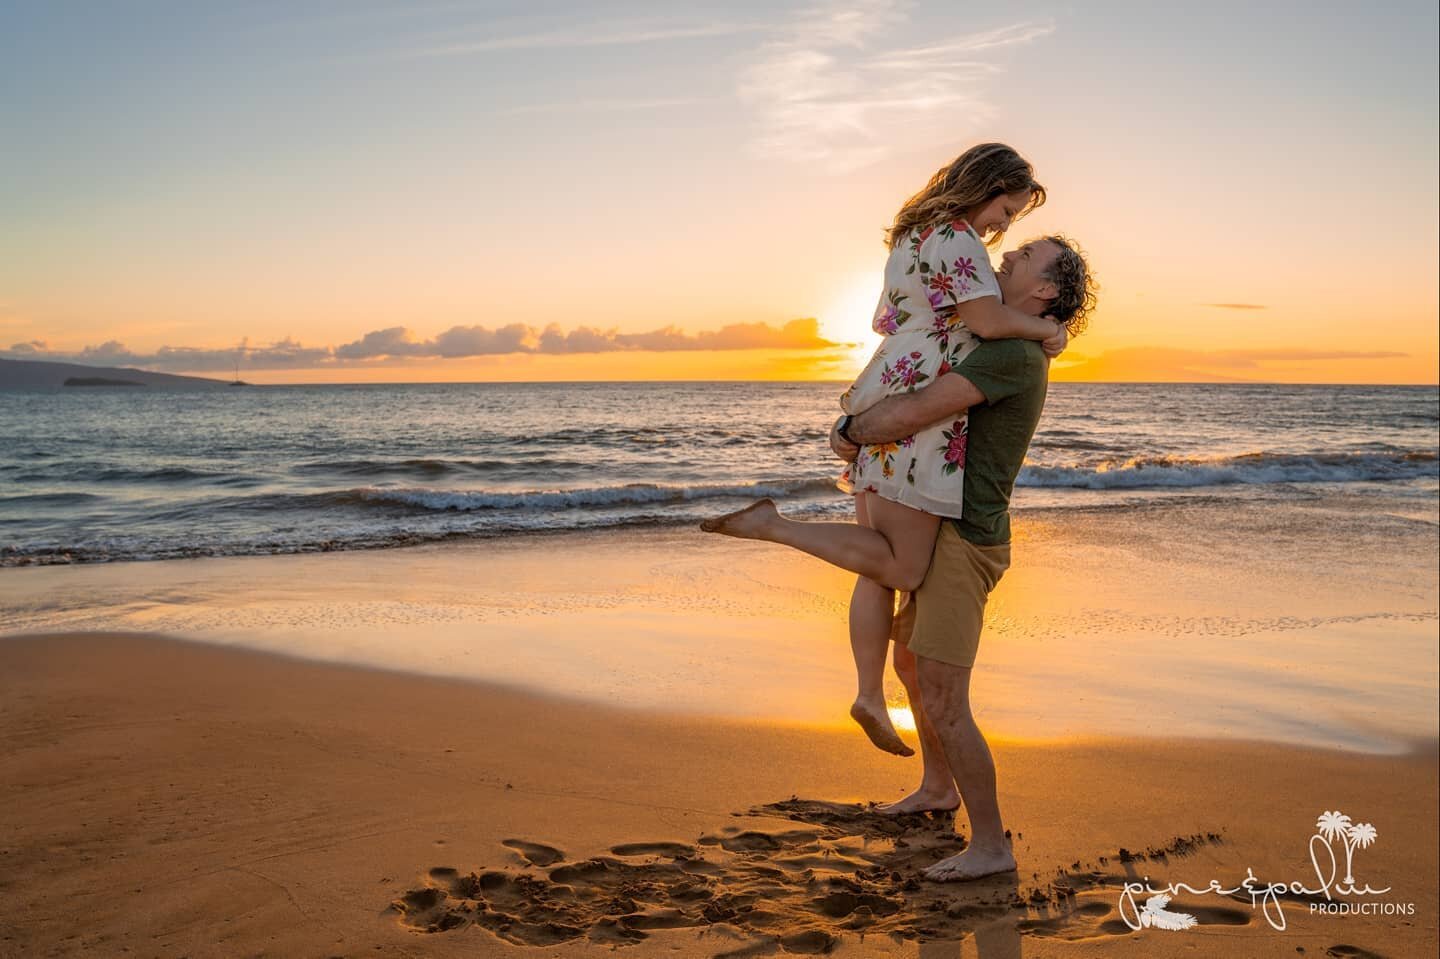 Sending out some Tuesday love😘☀️❤

Reliving Vickie &amp; Dave's magical sunset shoot. They nailed all the poses we've thrown at them... &amp; well the results speaks for itself!!😍🥰🤩

Been so busy with shoots that getting to posting has been last 